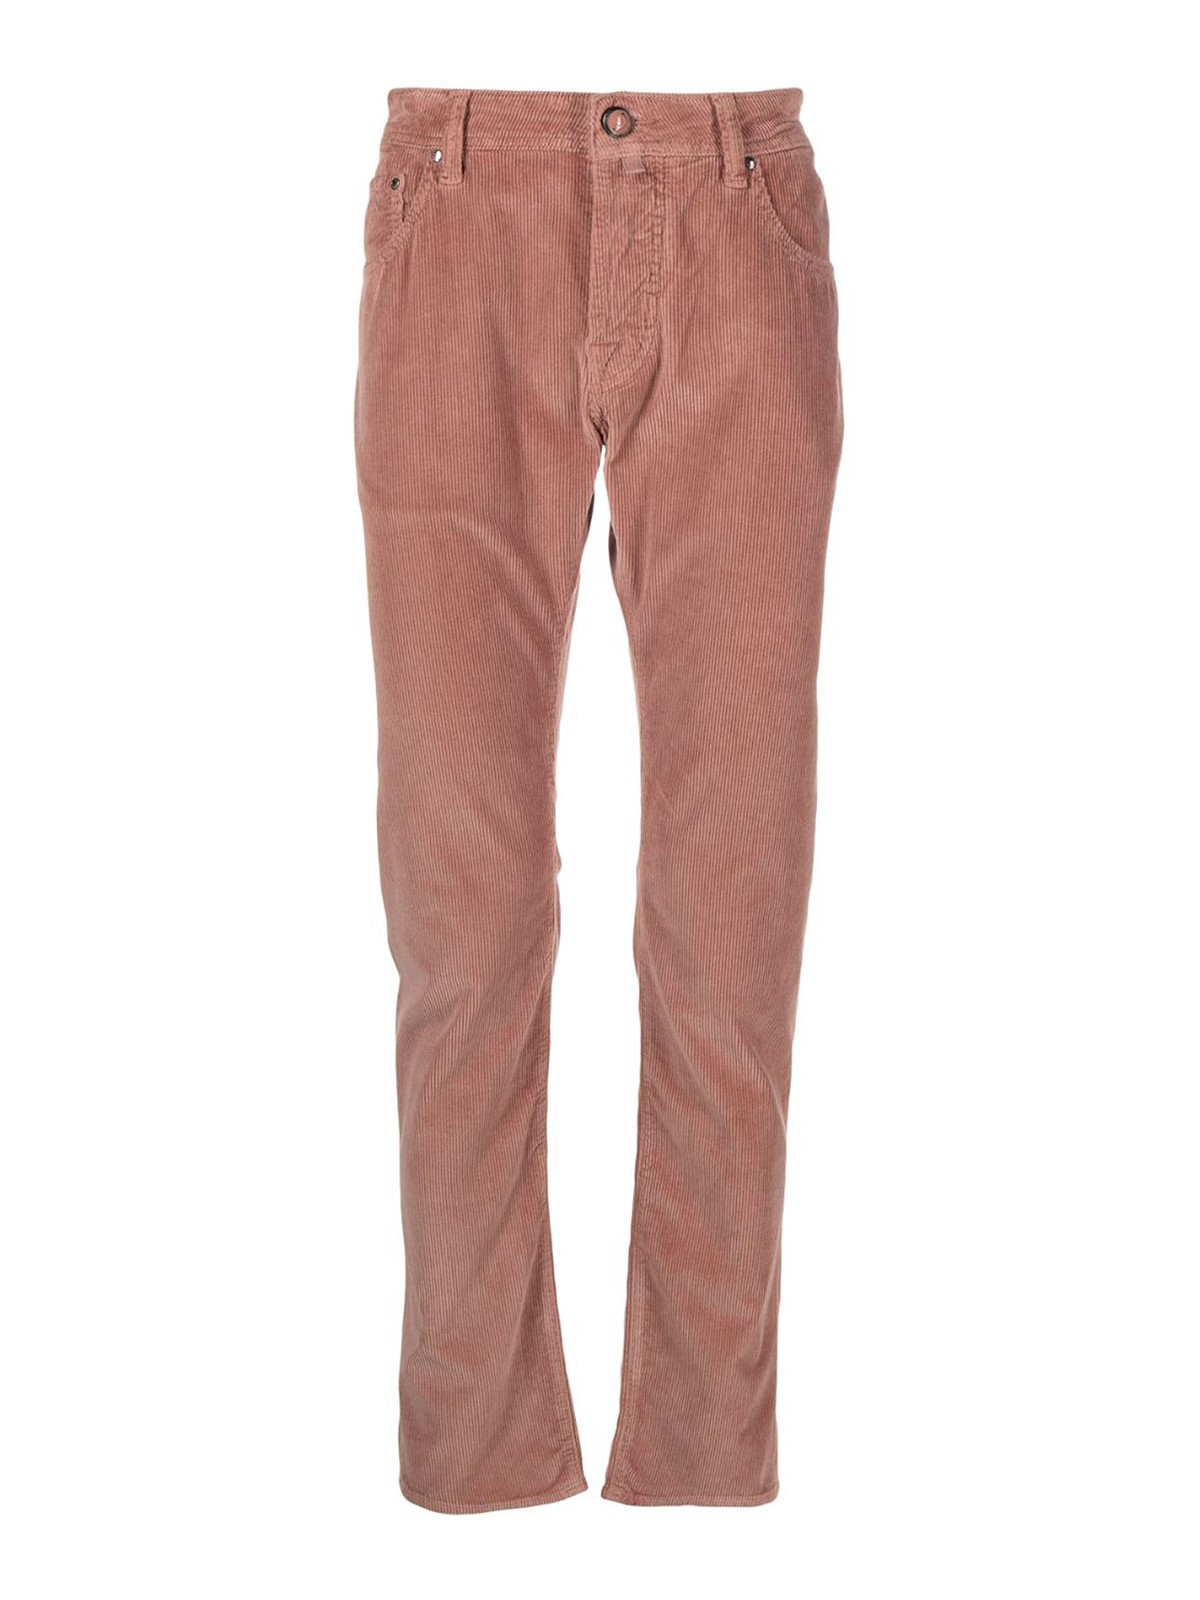 Jacob Cohen Nick Slim Fit Corduroy Trousers In Nude & Neutrals